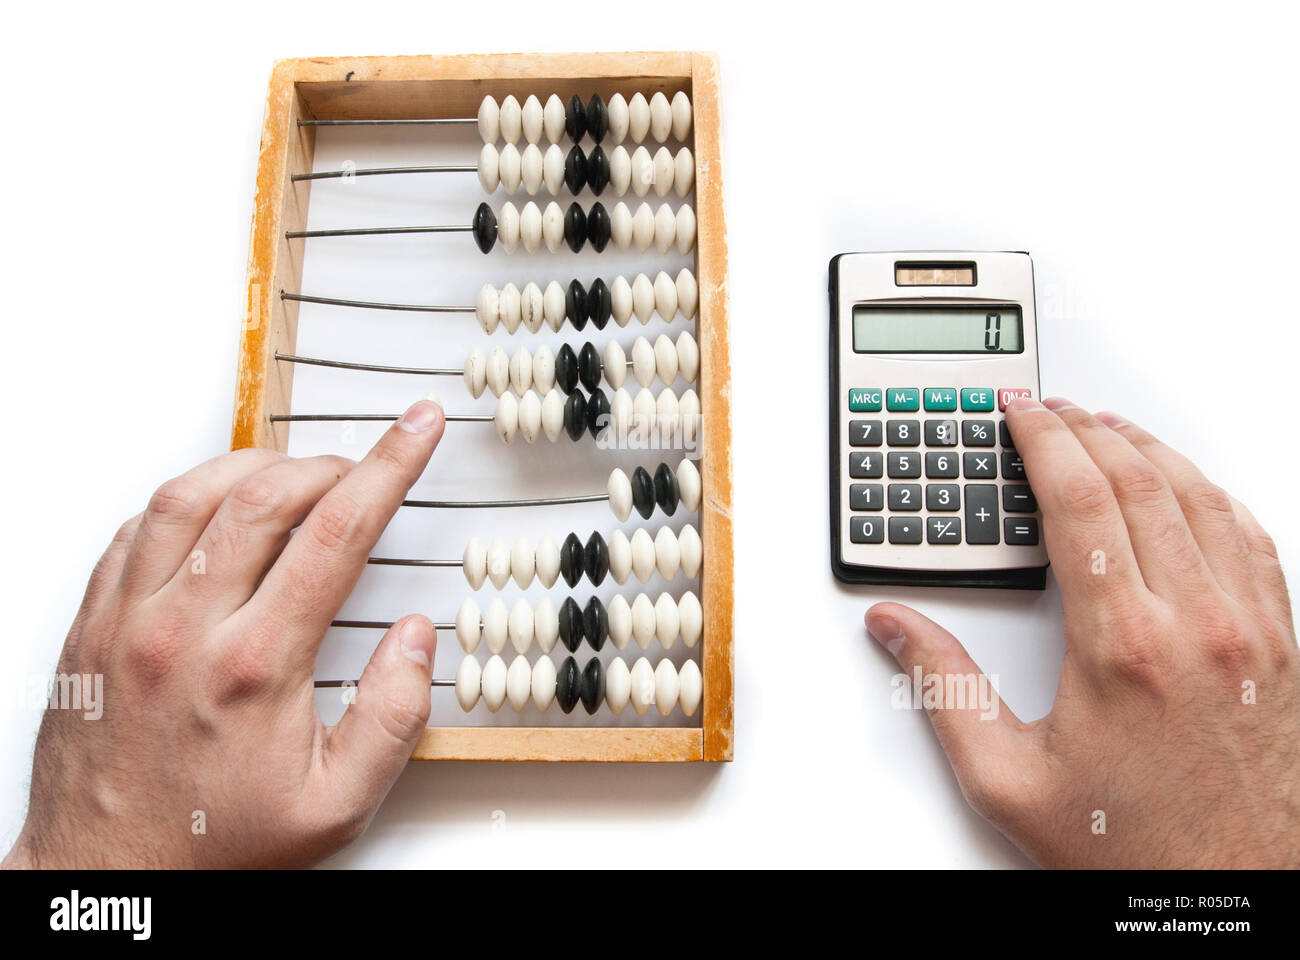 old abacus with calculator and hands Stock Photo - Alamy